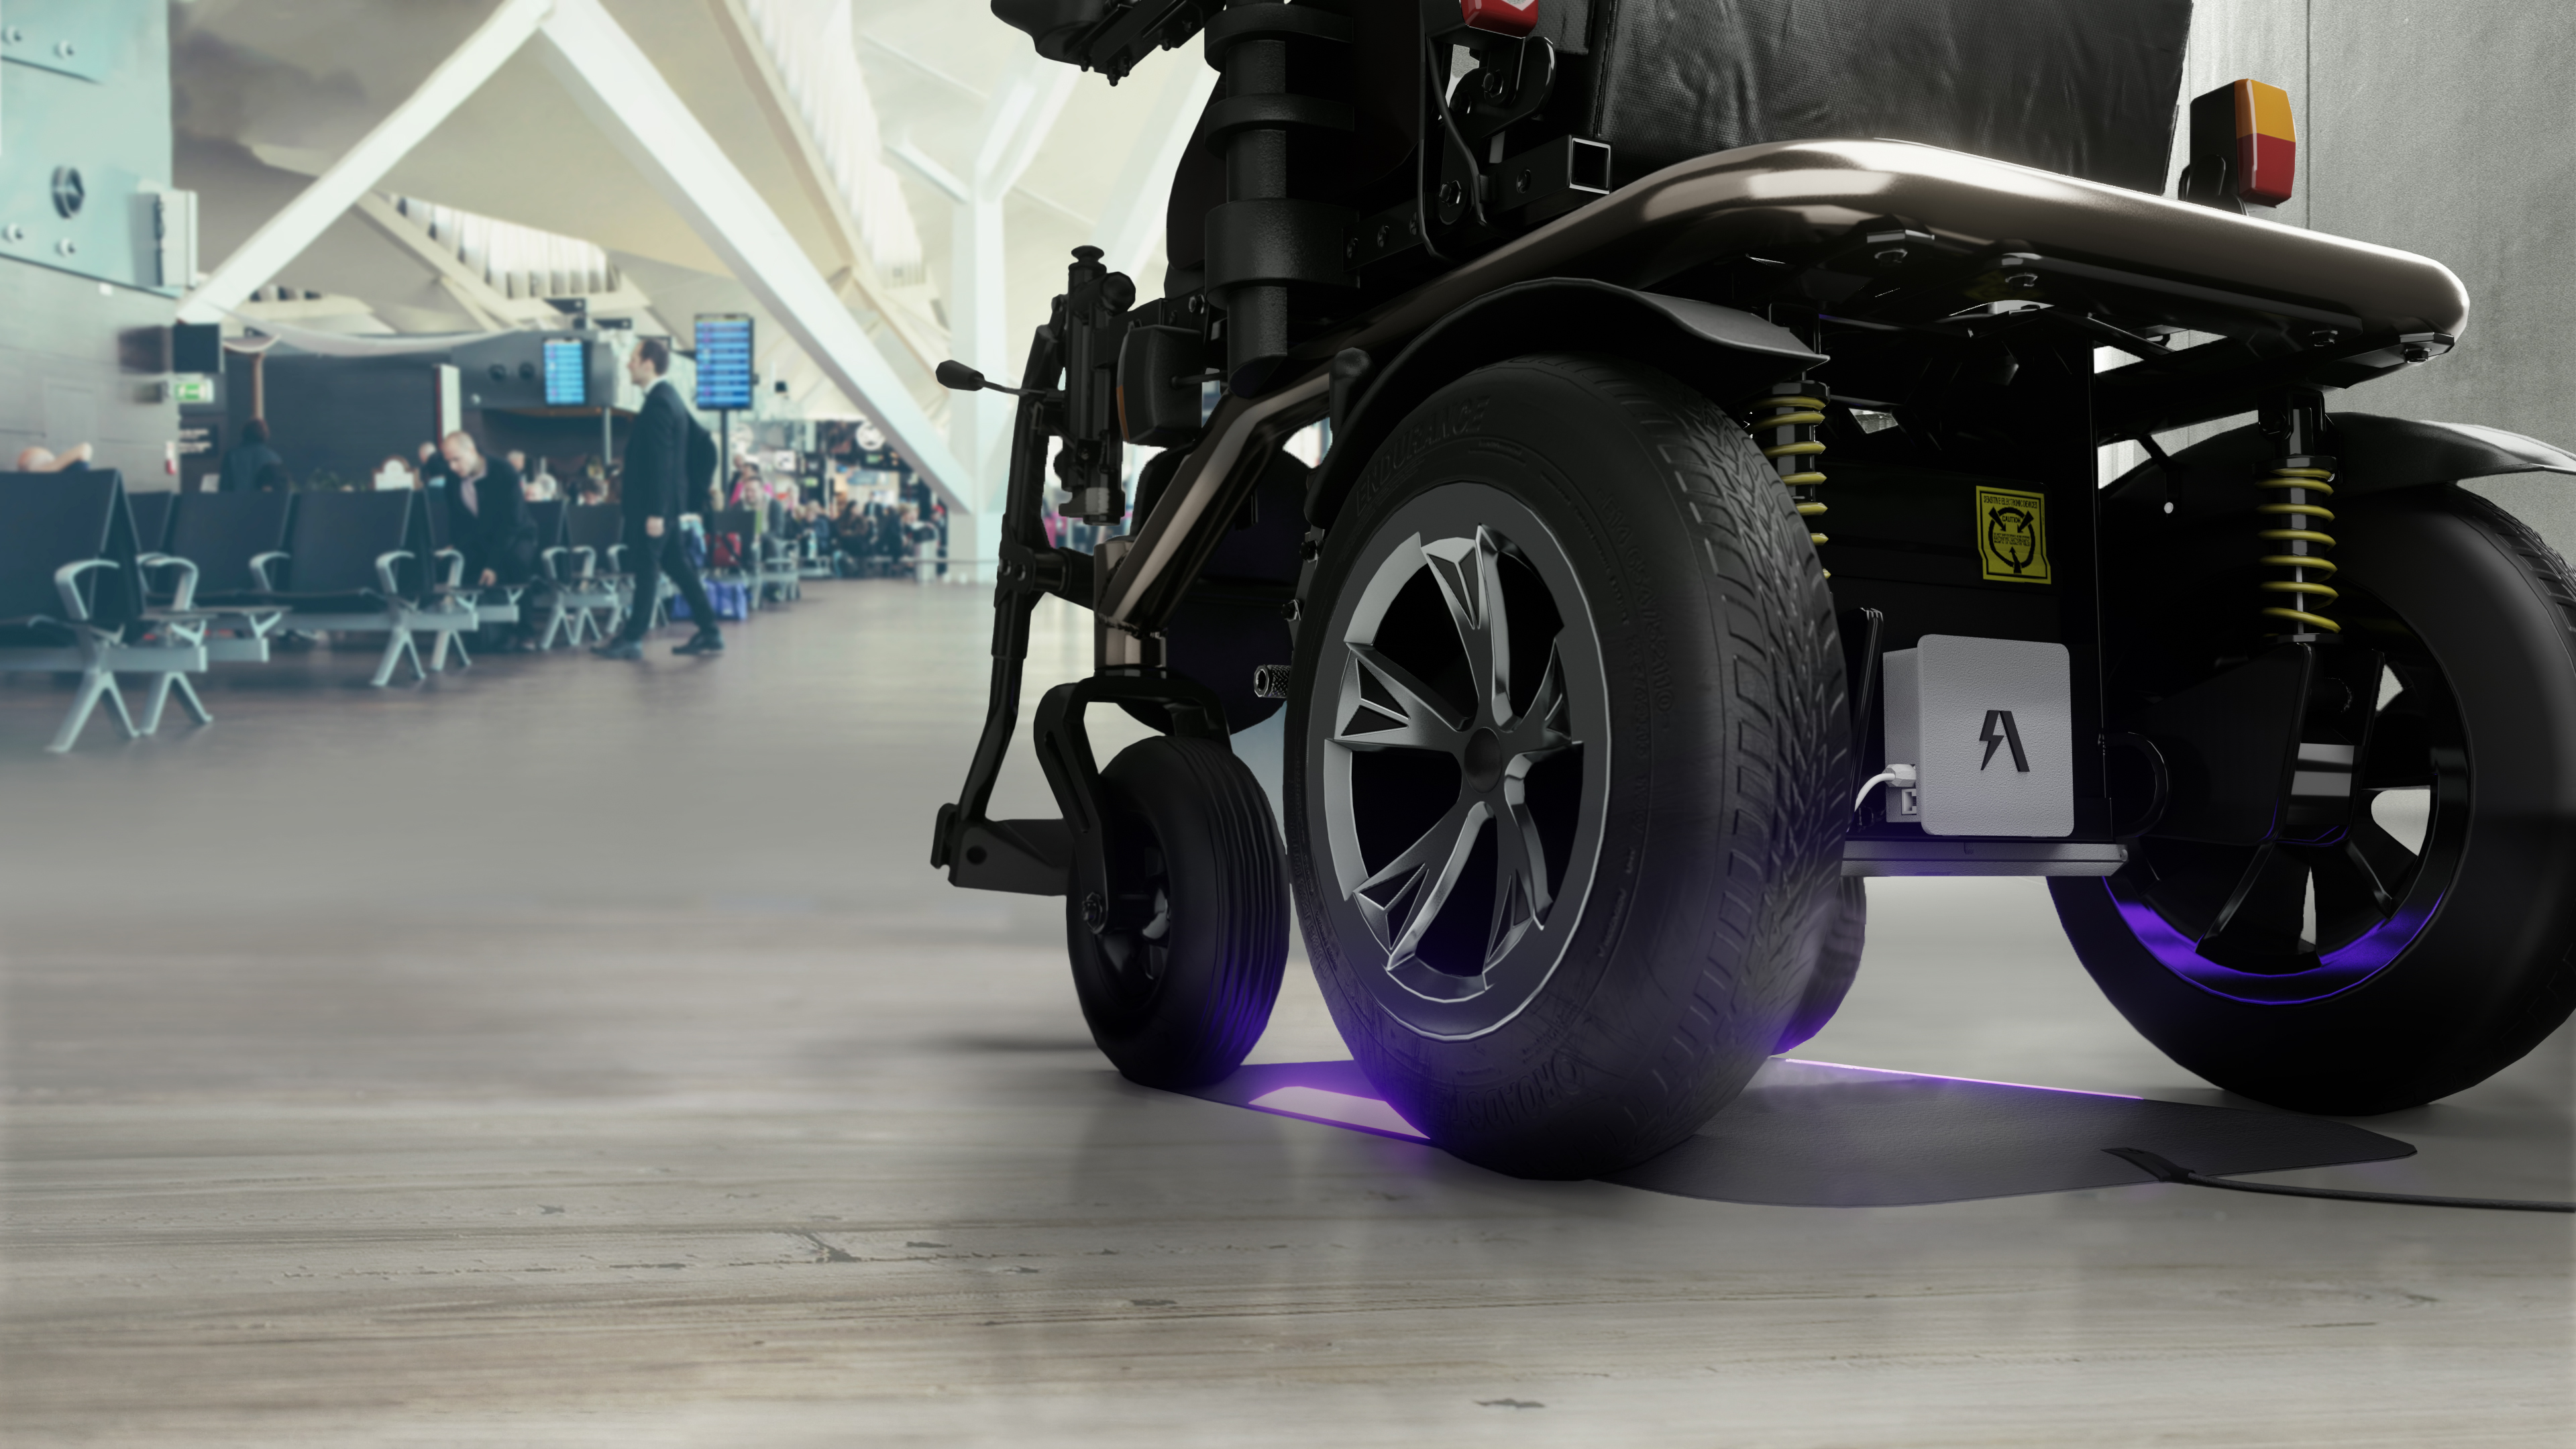 Modern wheelchair with sleek design and purple underglow in a university setting.